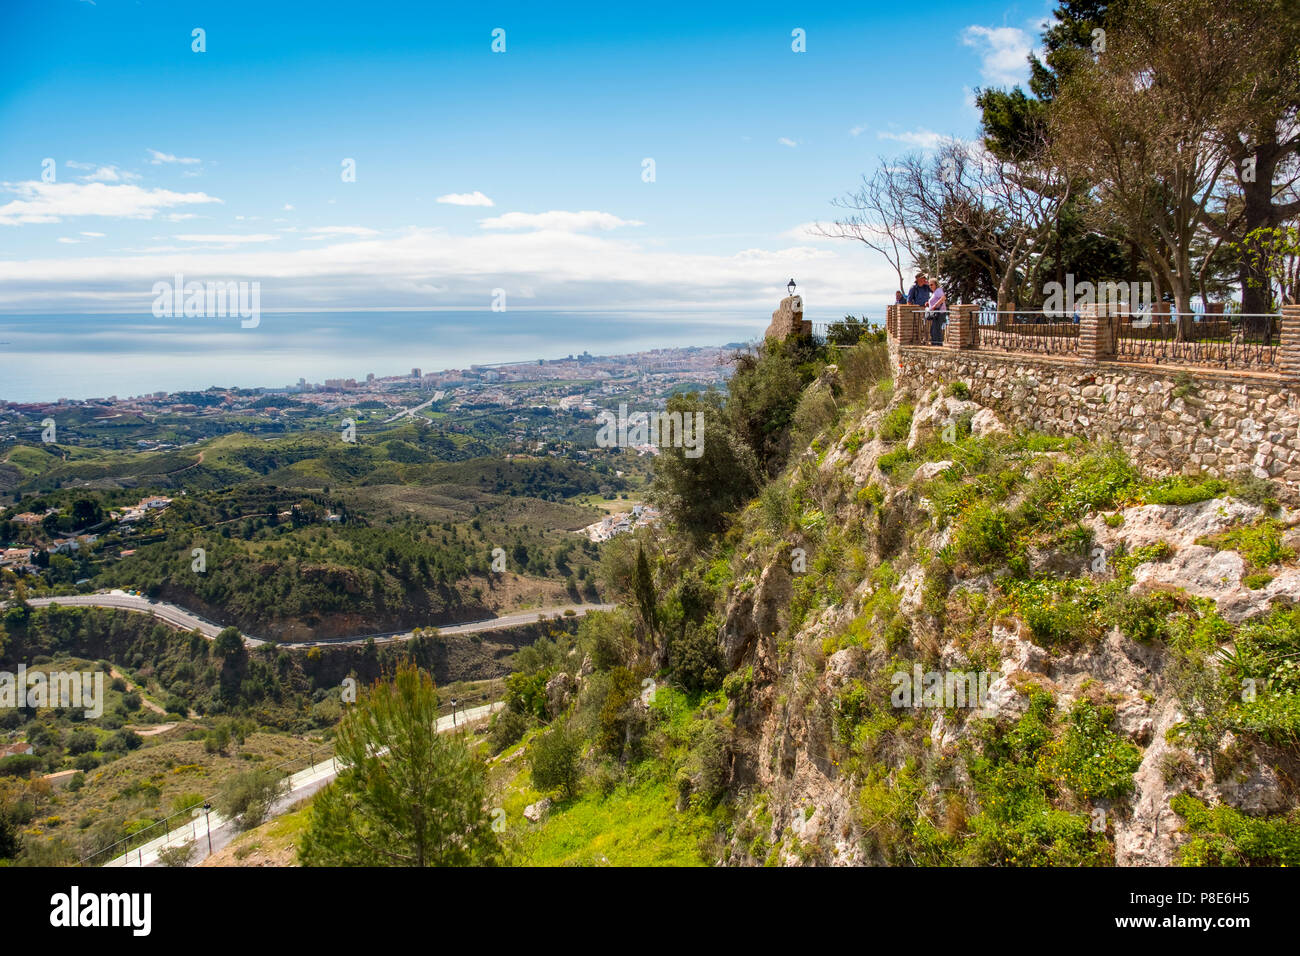 Ancient Arab wall, panoramic view and gardens. White Village of Mijas, Malaga province, Costa del Sol, Andalusia, Spain Europe Stock Photo